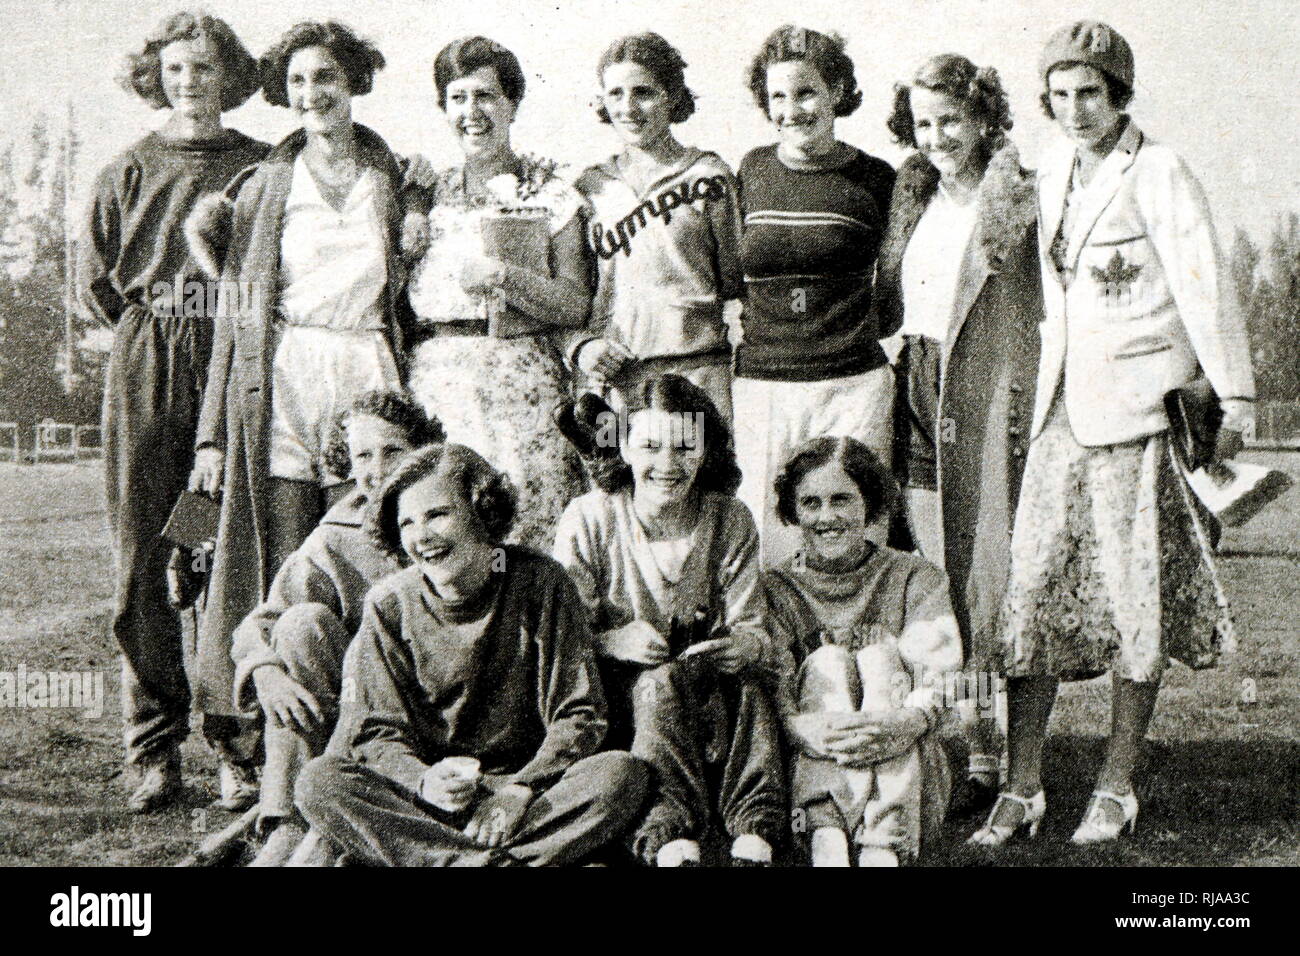 Photograph of the Canadian female track and field team 1932 Los Angeles Olympics. Lillian Palmer, Eva Davies, Alexandrine Gibb, Betty Taylor, Mary Vandervild, Mildred Vizzell, Myr the cook, Hilda Strike, Mary Vizzel, Aileen Meagher, Alda Wilson. Dated 20th Century Stock Photo